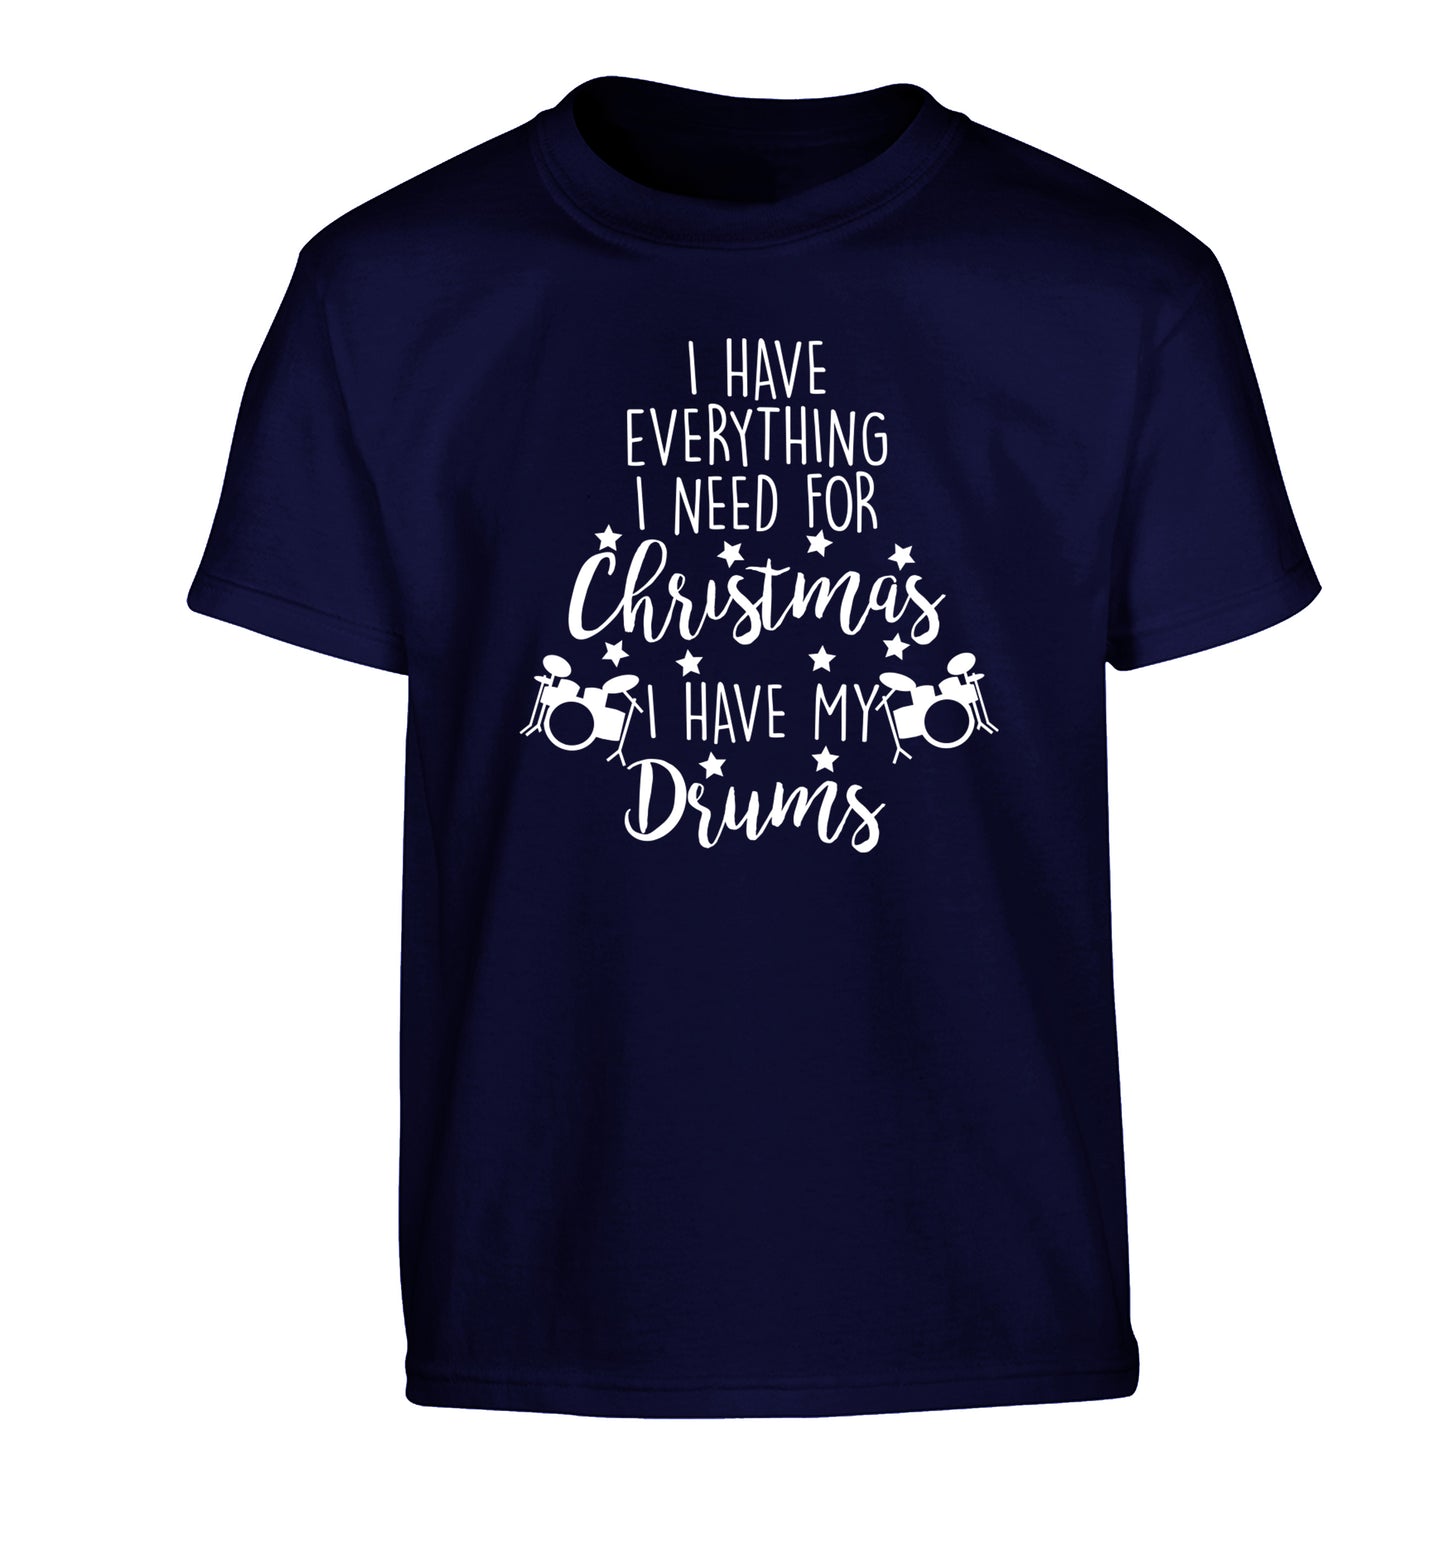 I have everything I need for Christmas I have my drums! Children's navy Tshirt 12-14 Years